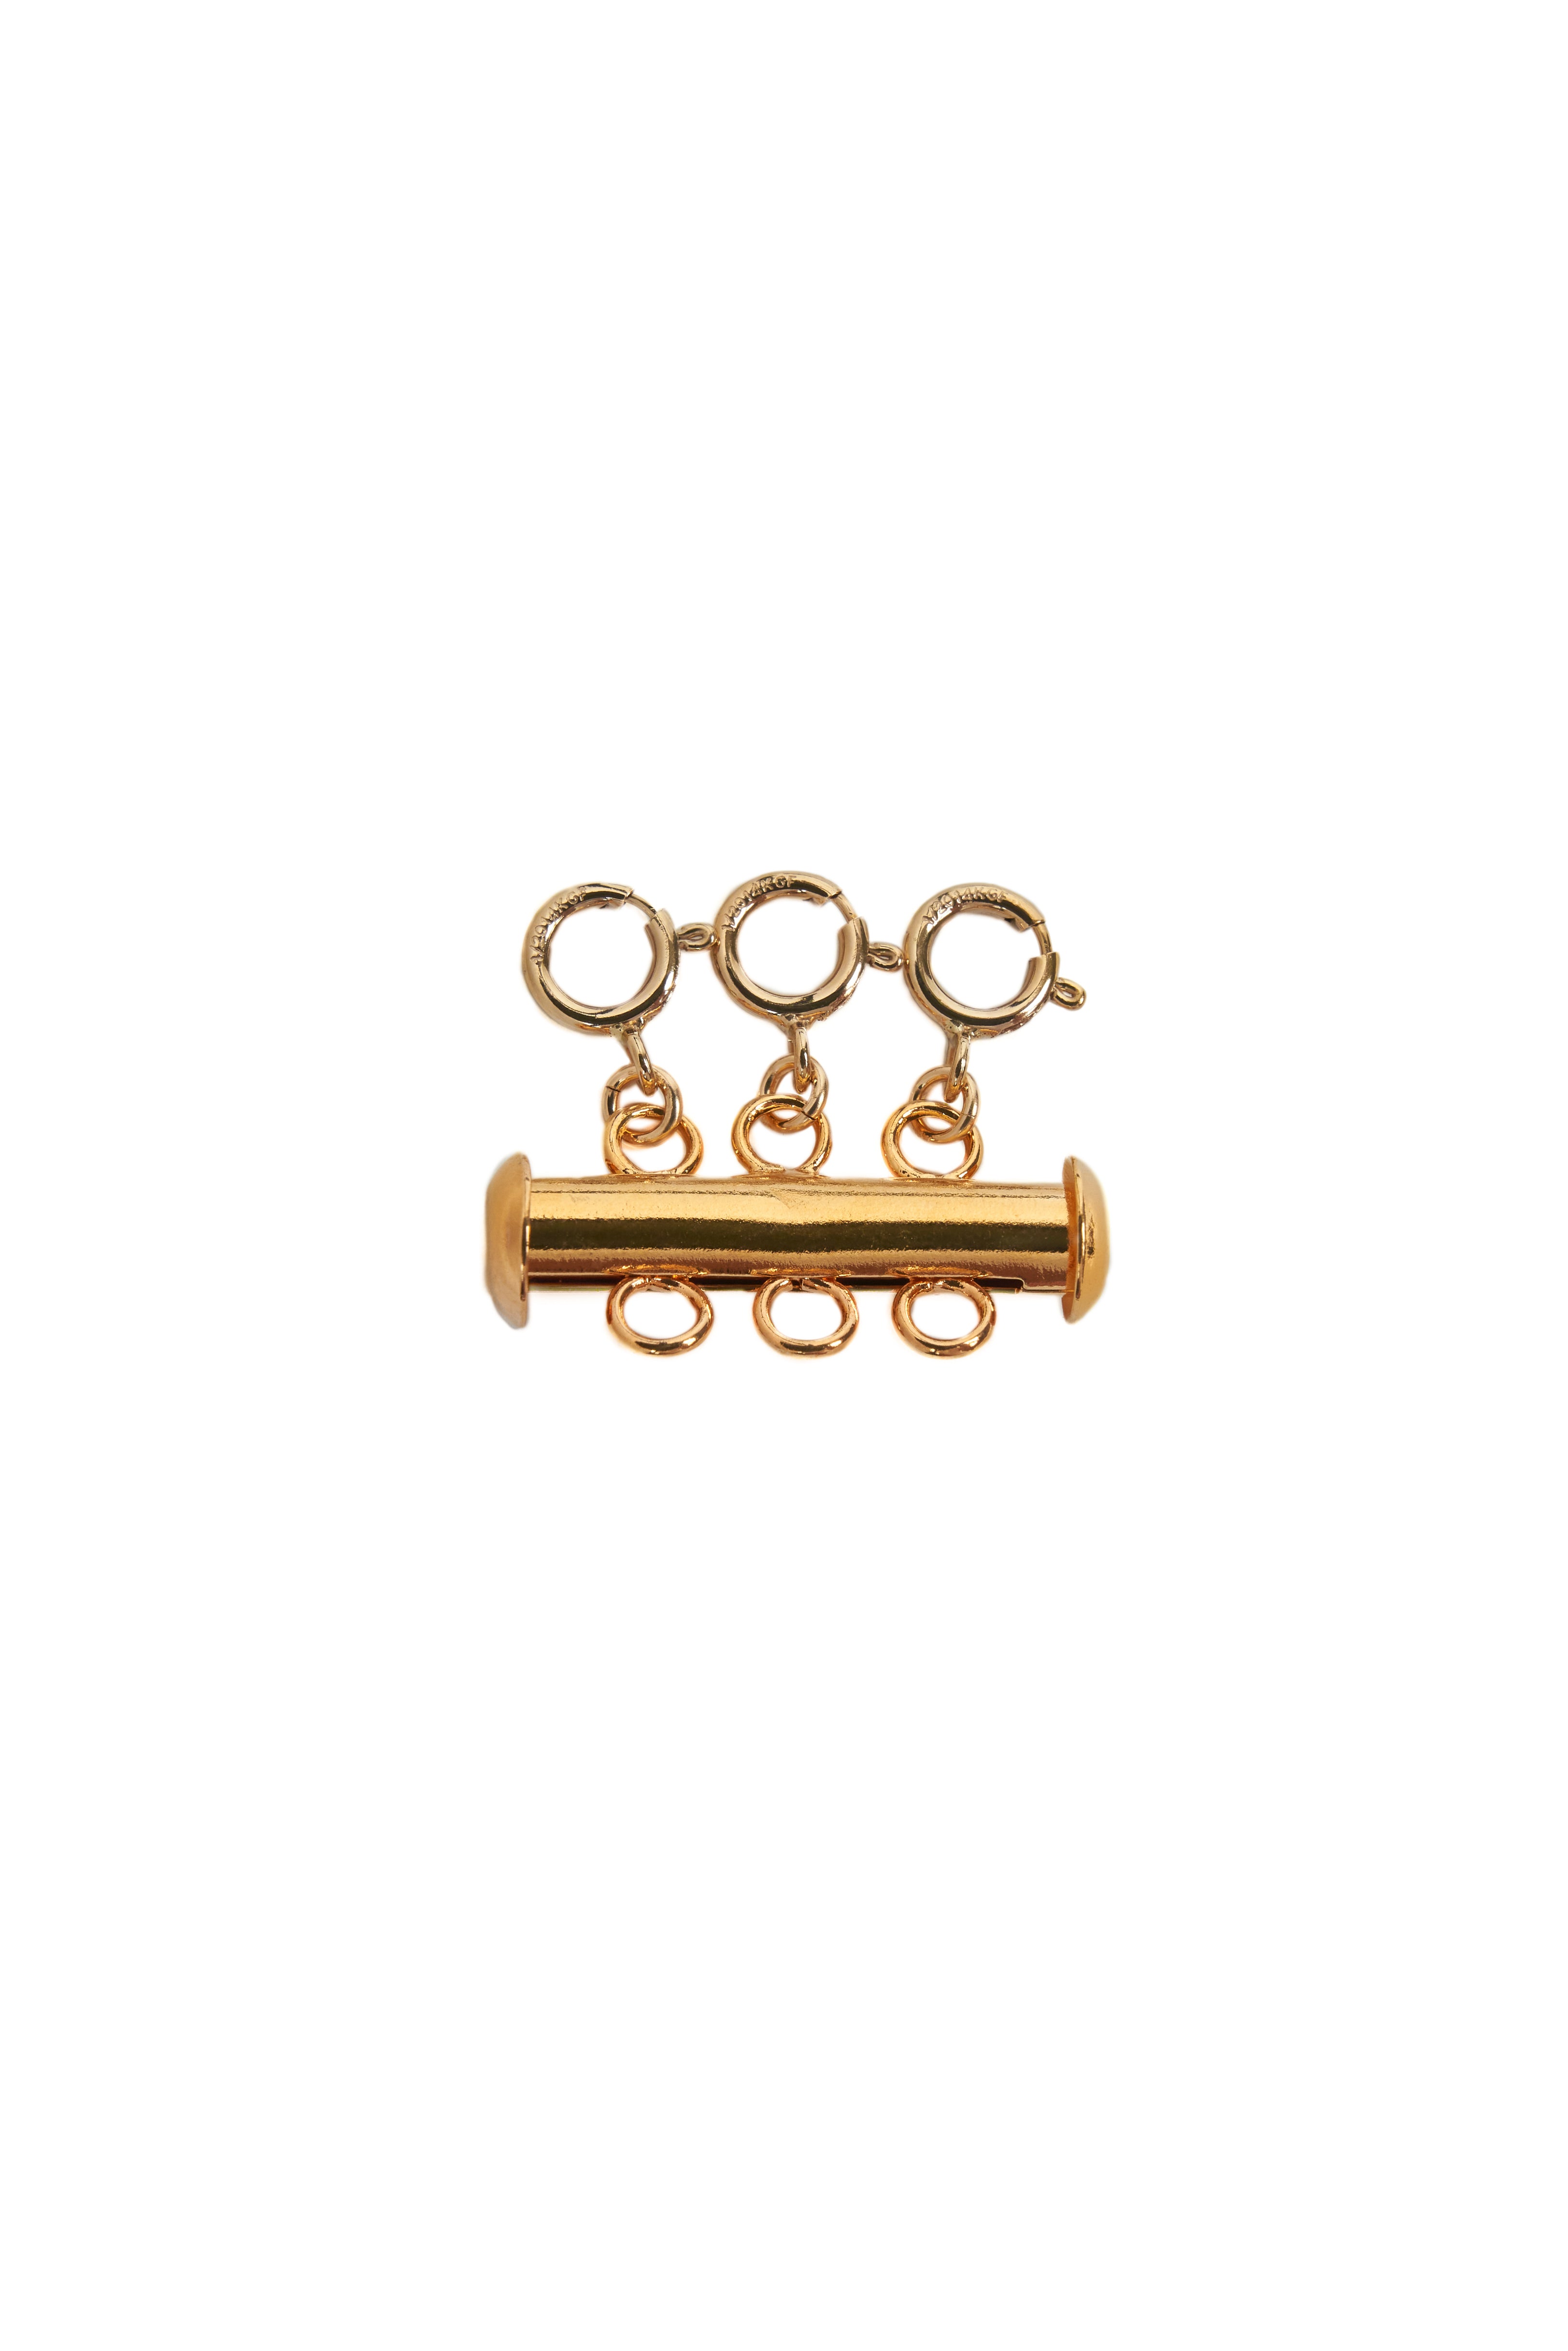 Stacker Clasp: 3 Layer - Gold Fill